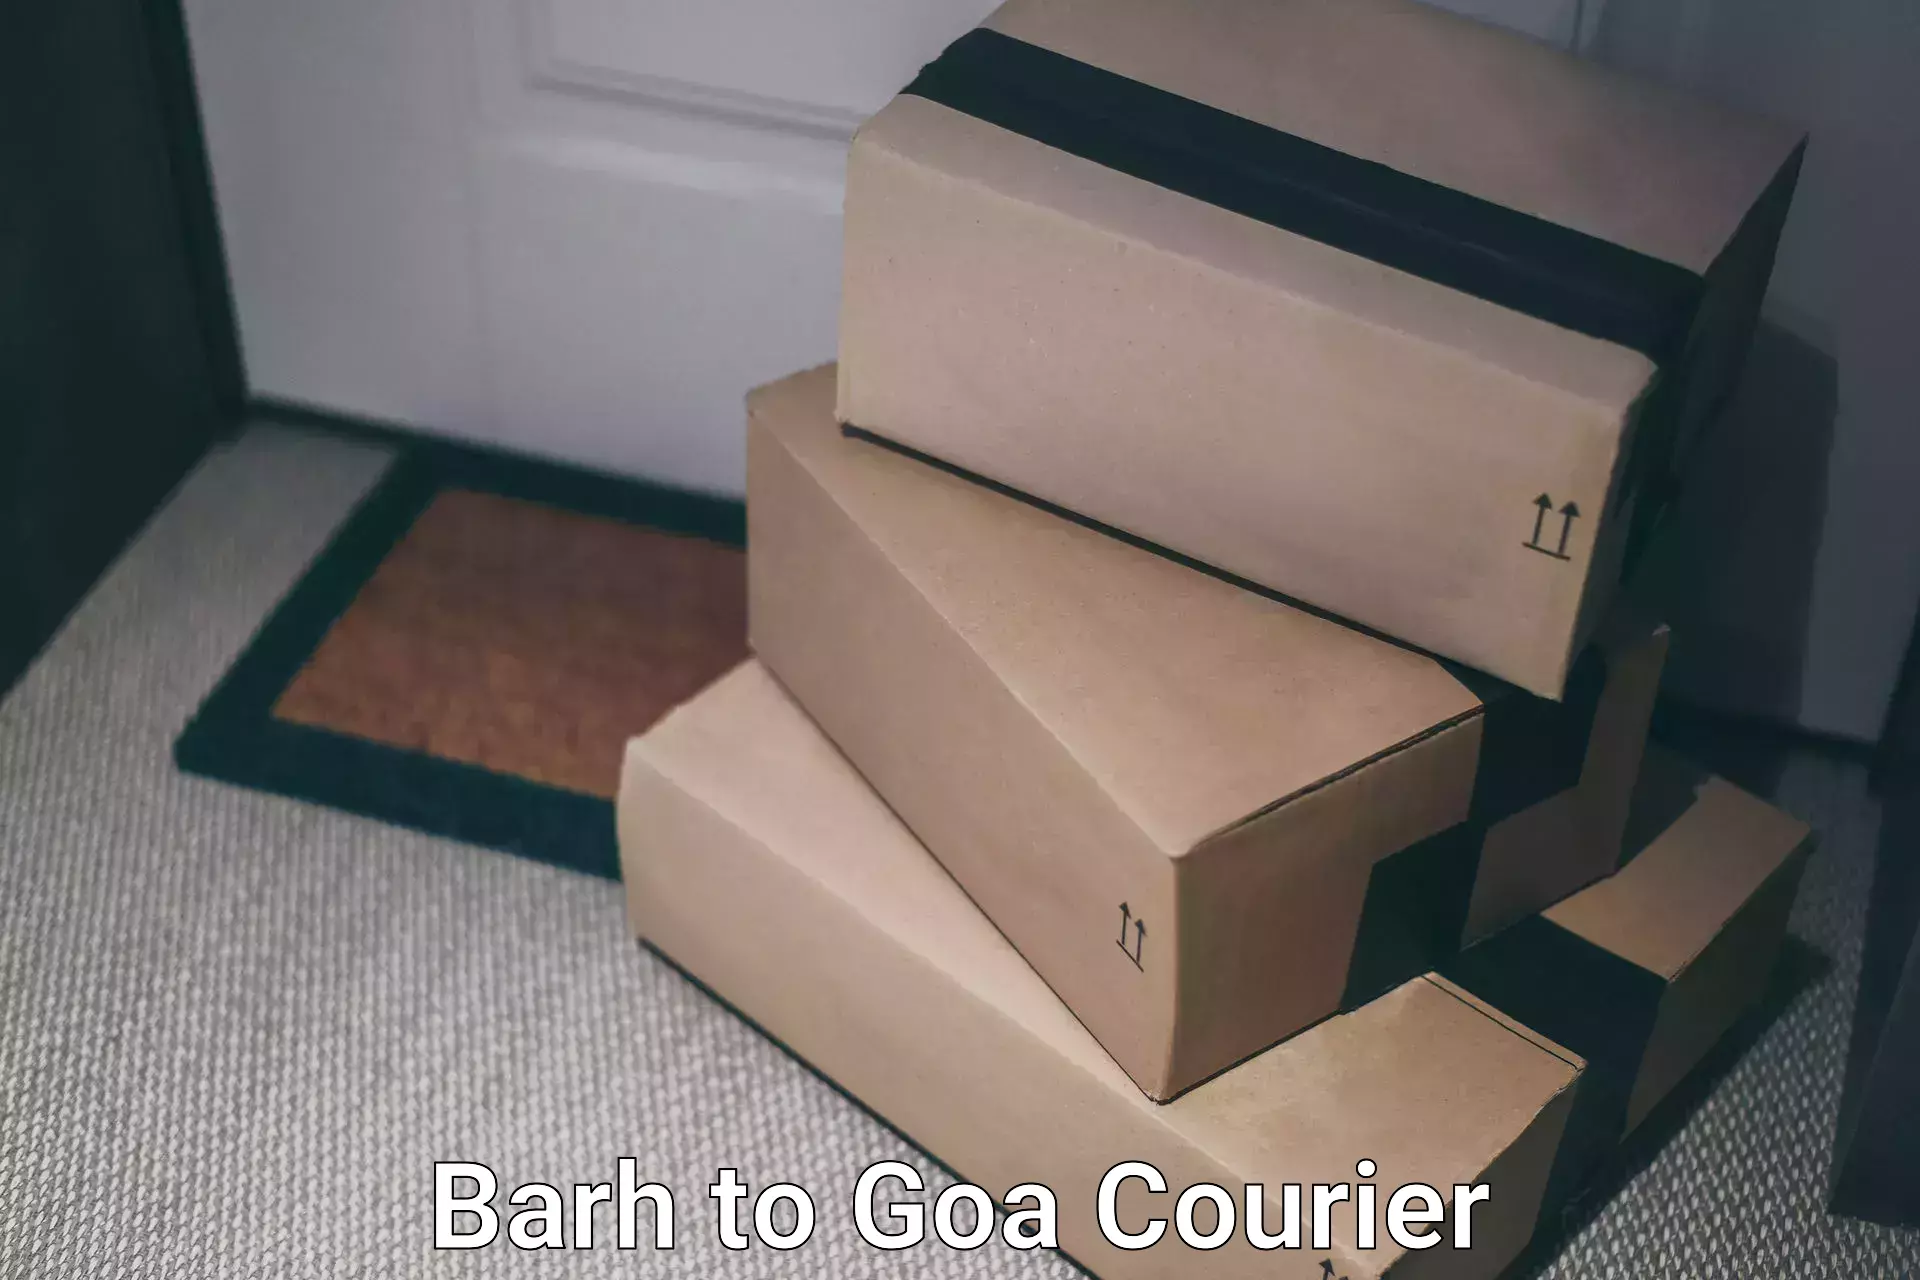 Courier services Barh to Panaji